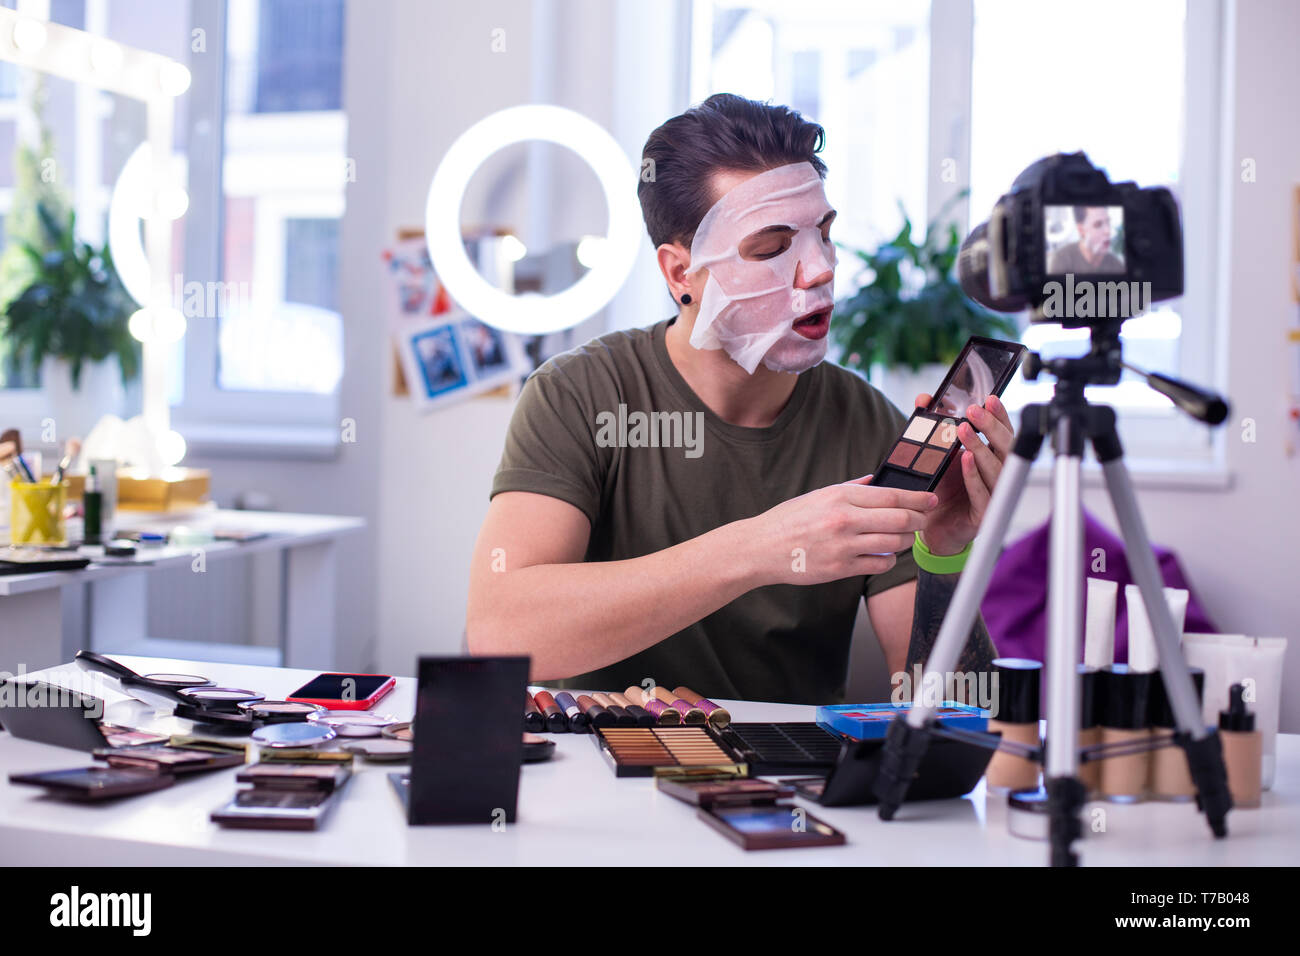 Curious interested man in face mask opening eyeshadow palette Stock Photo